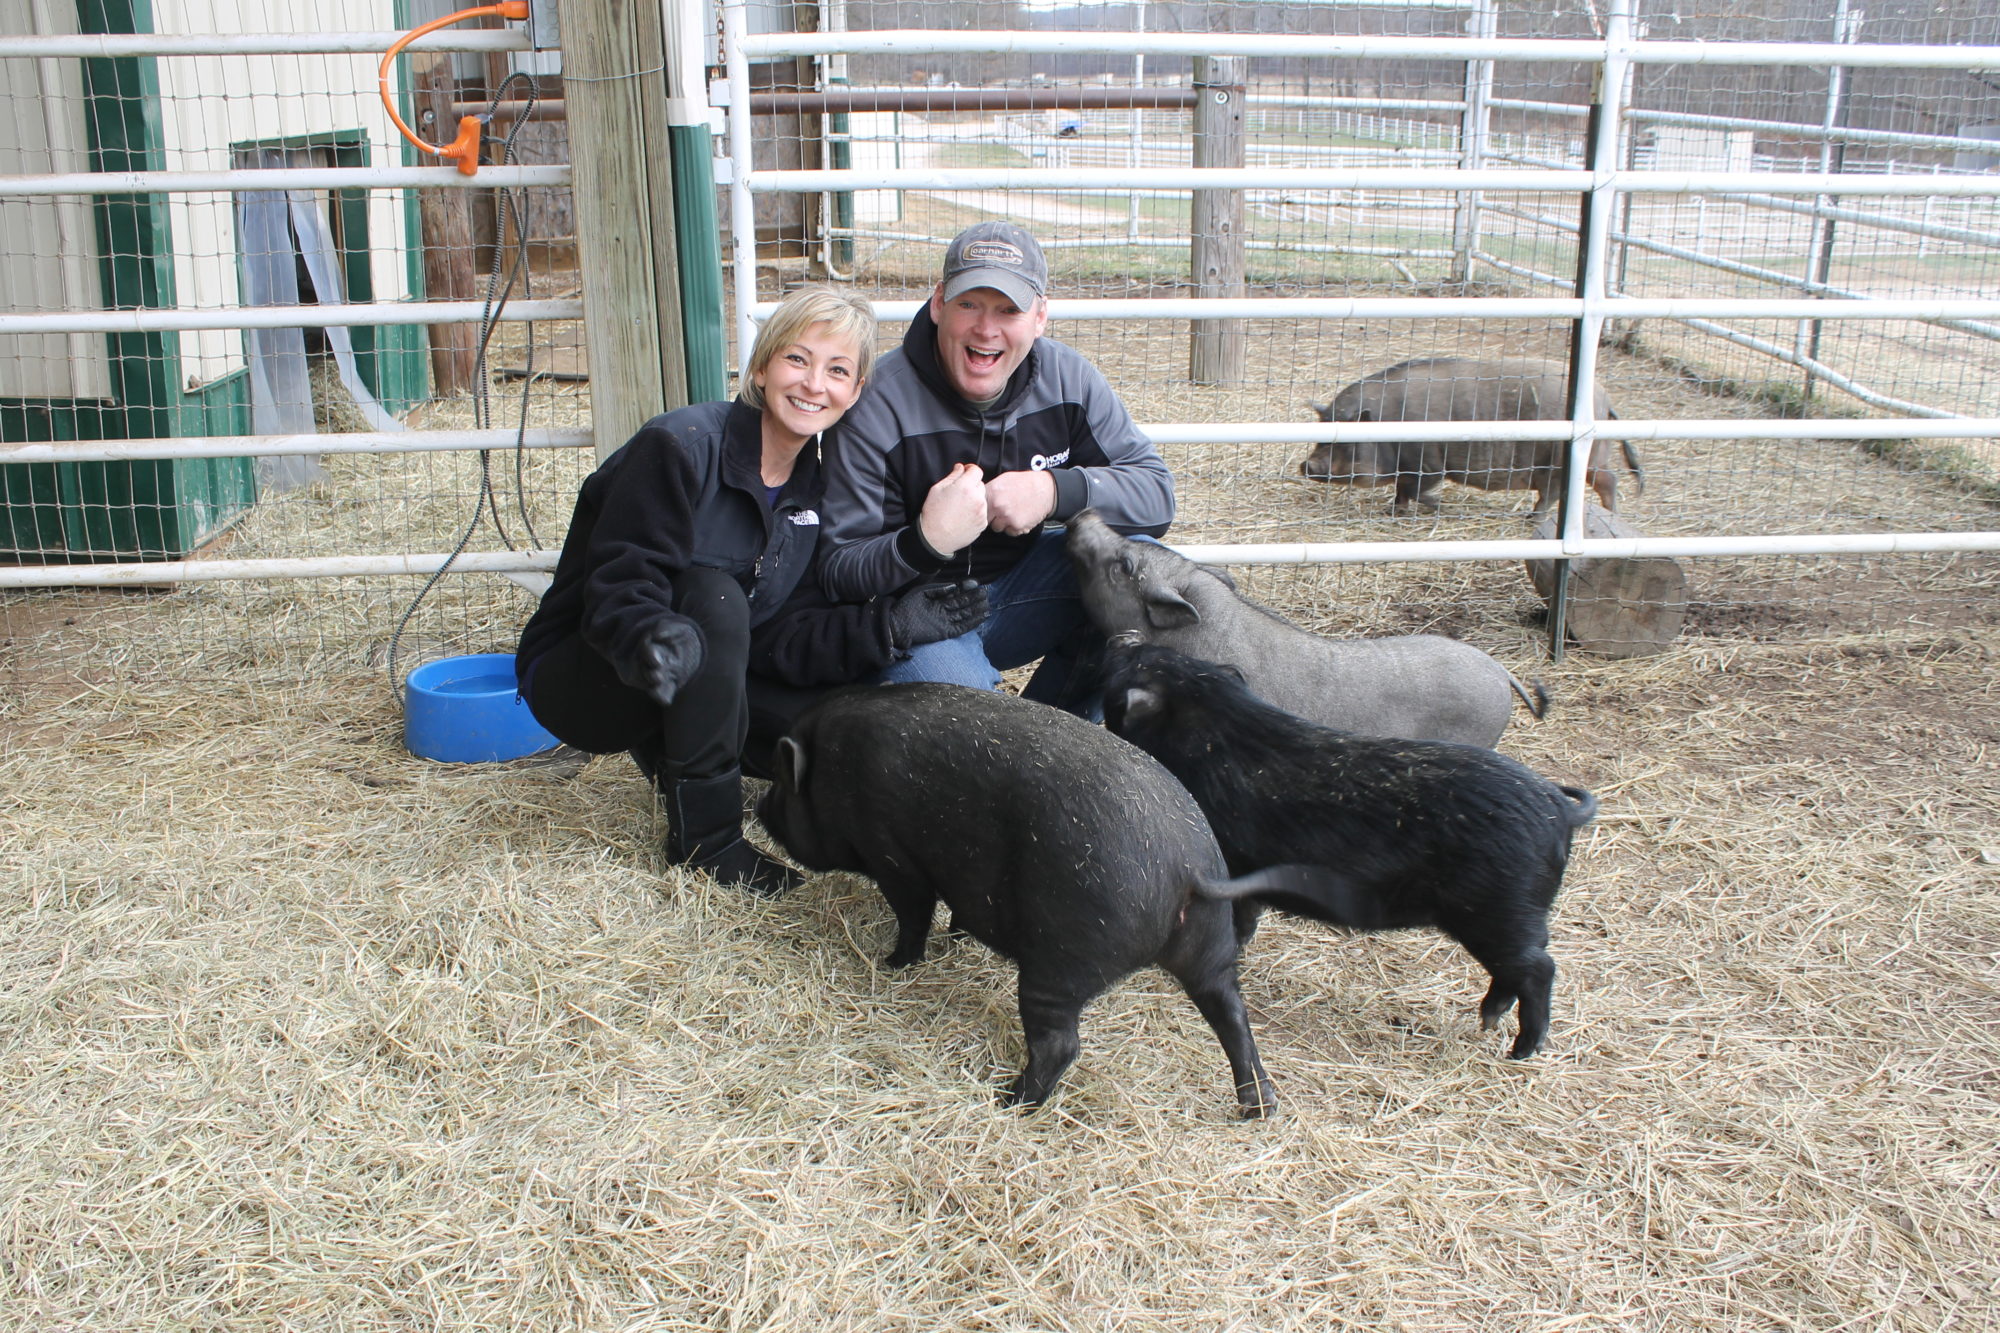 These three pigs found forever homes thanks to Longmeadow